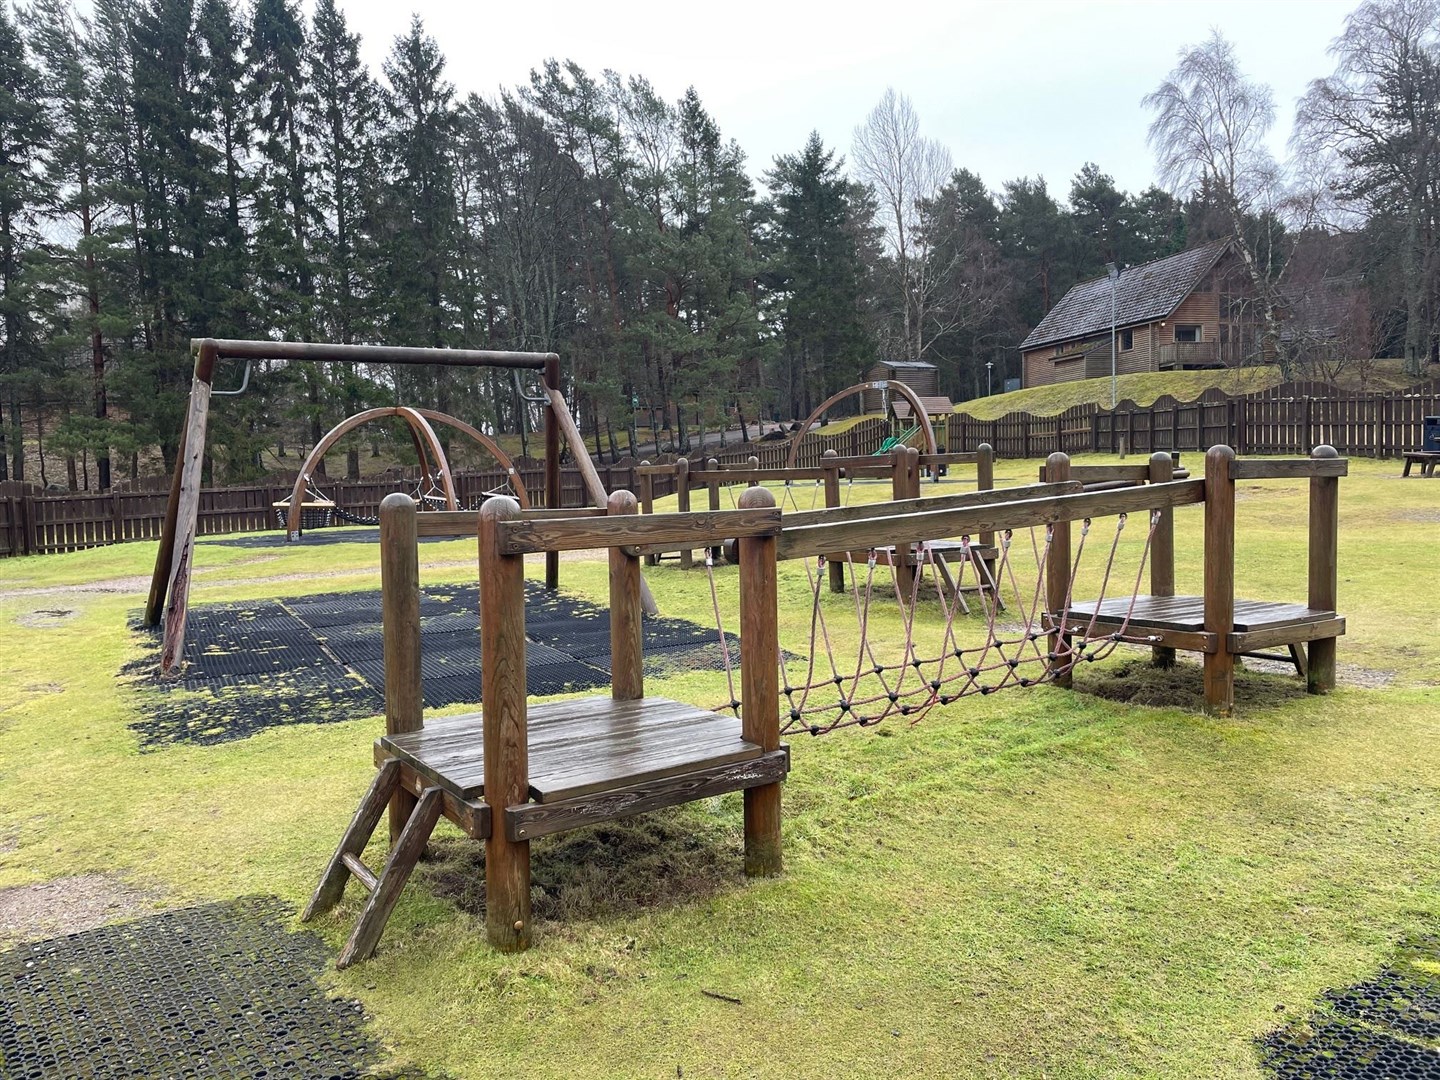 Part of the play park at the resort.